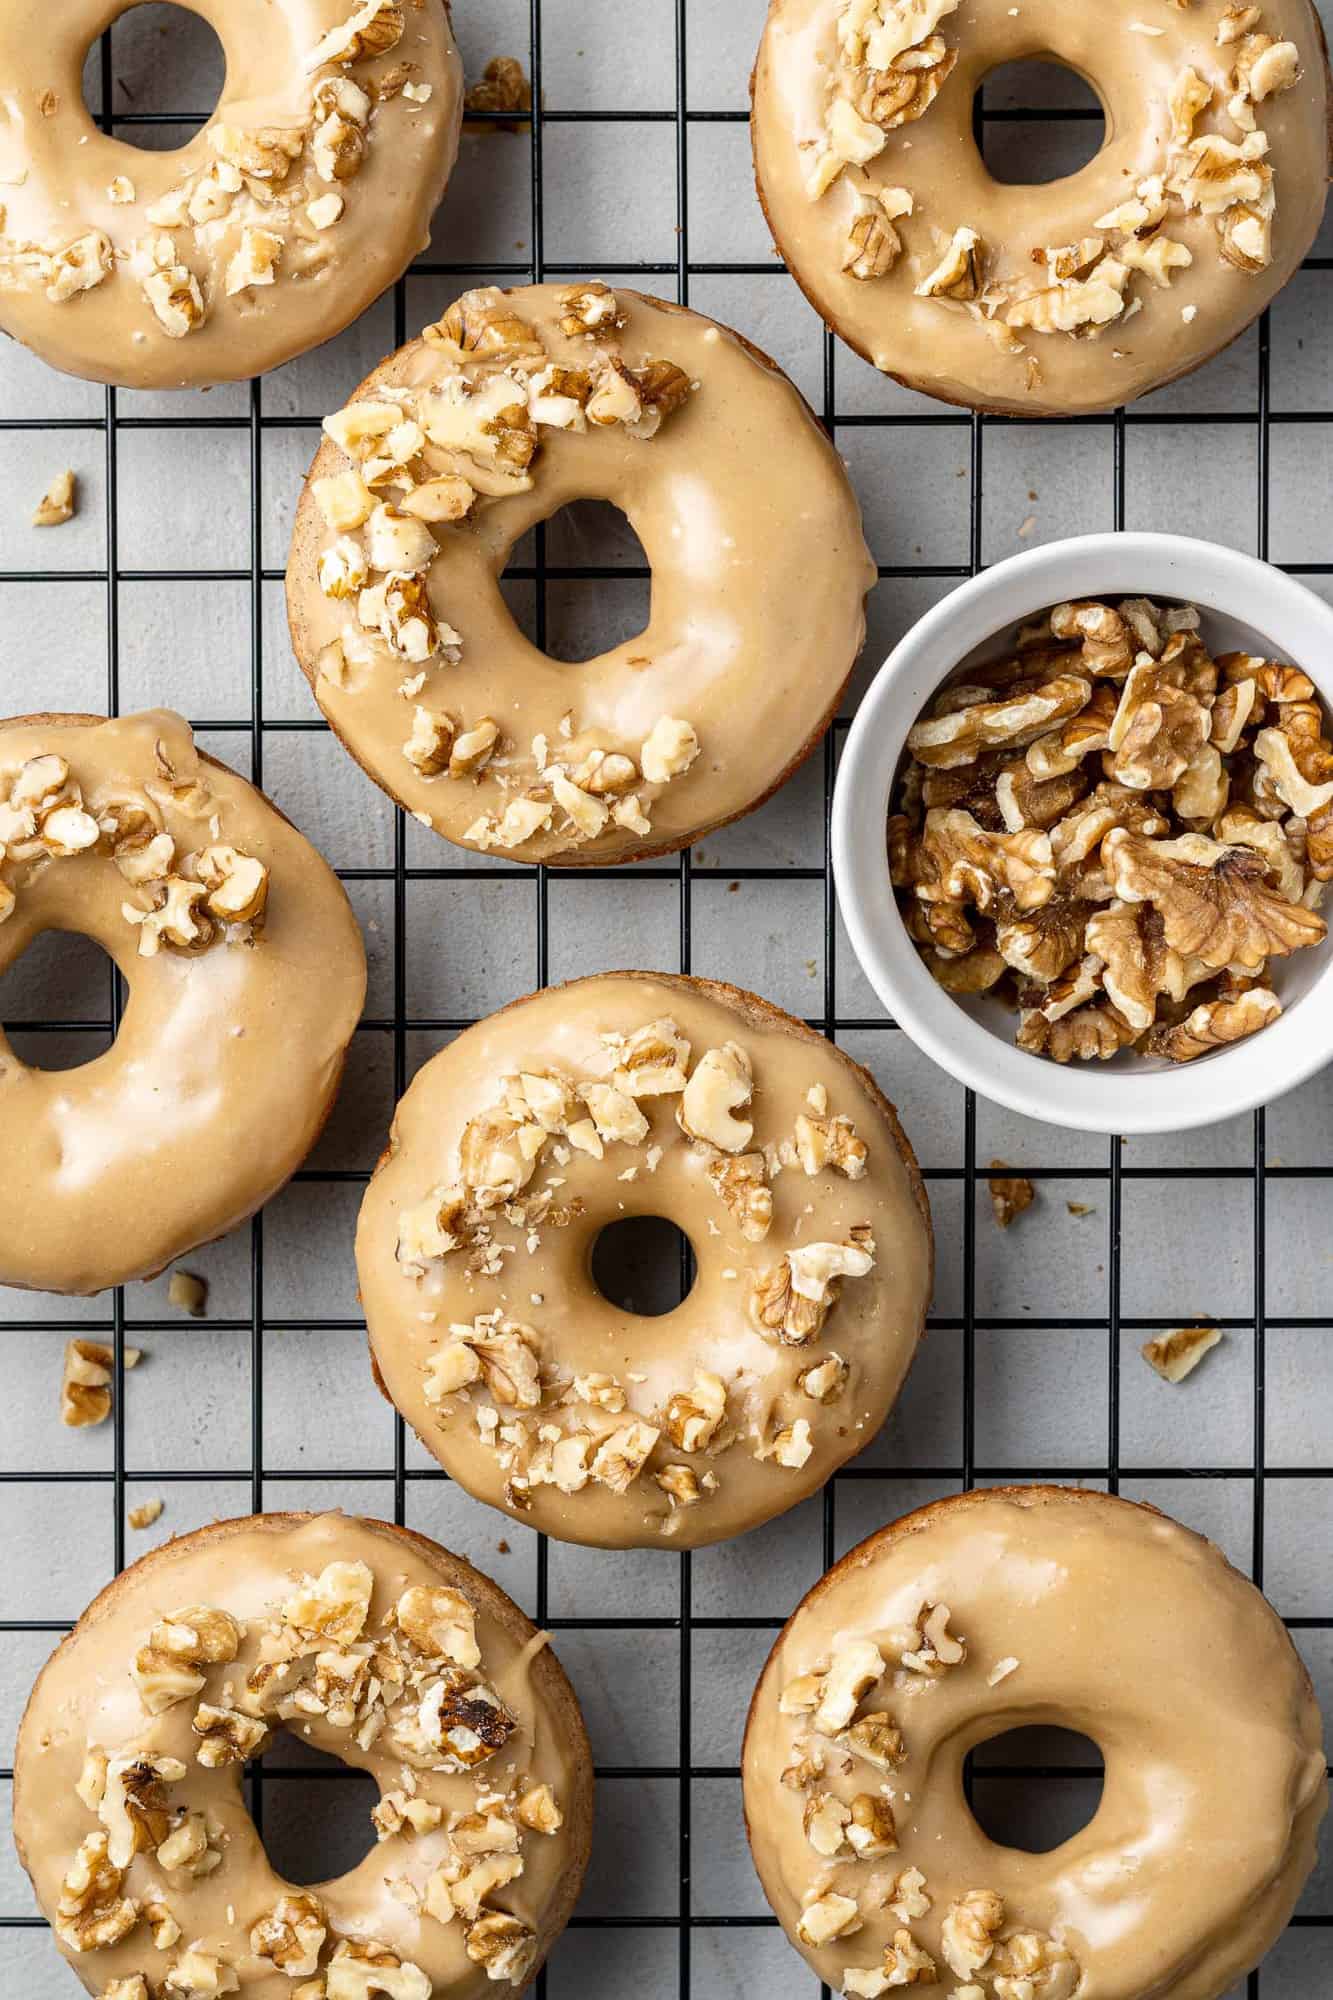 Glazed donuts topped with nuts.